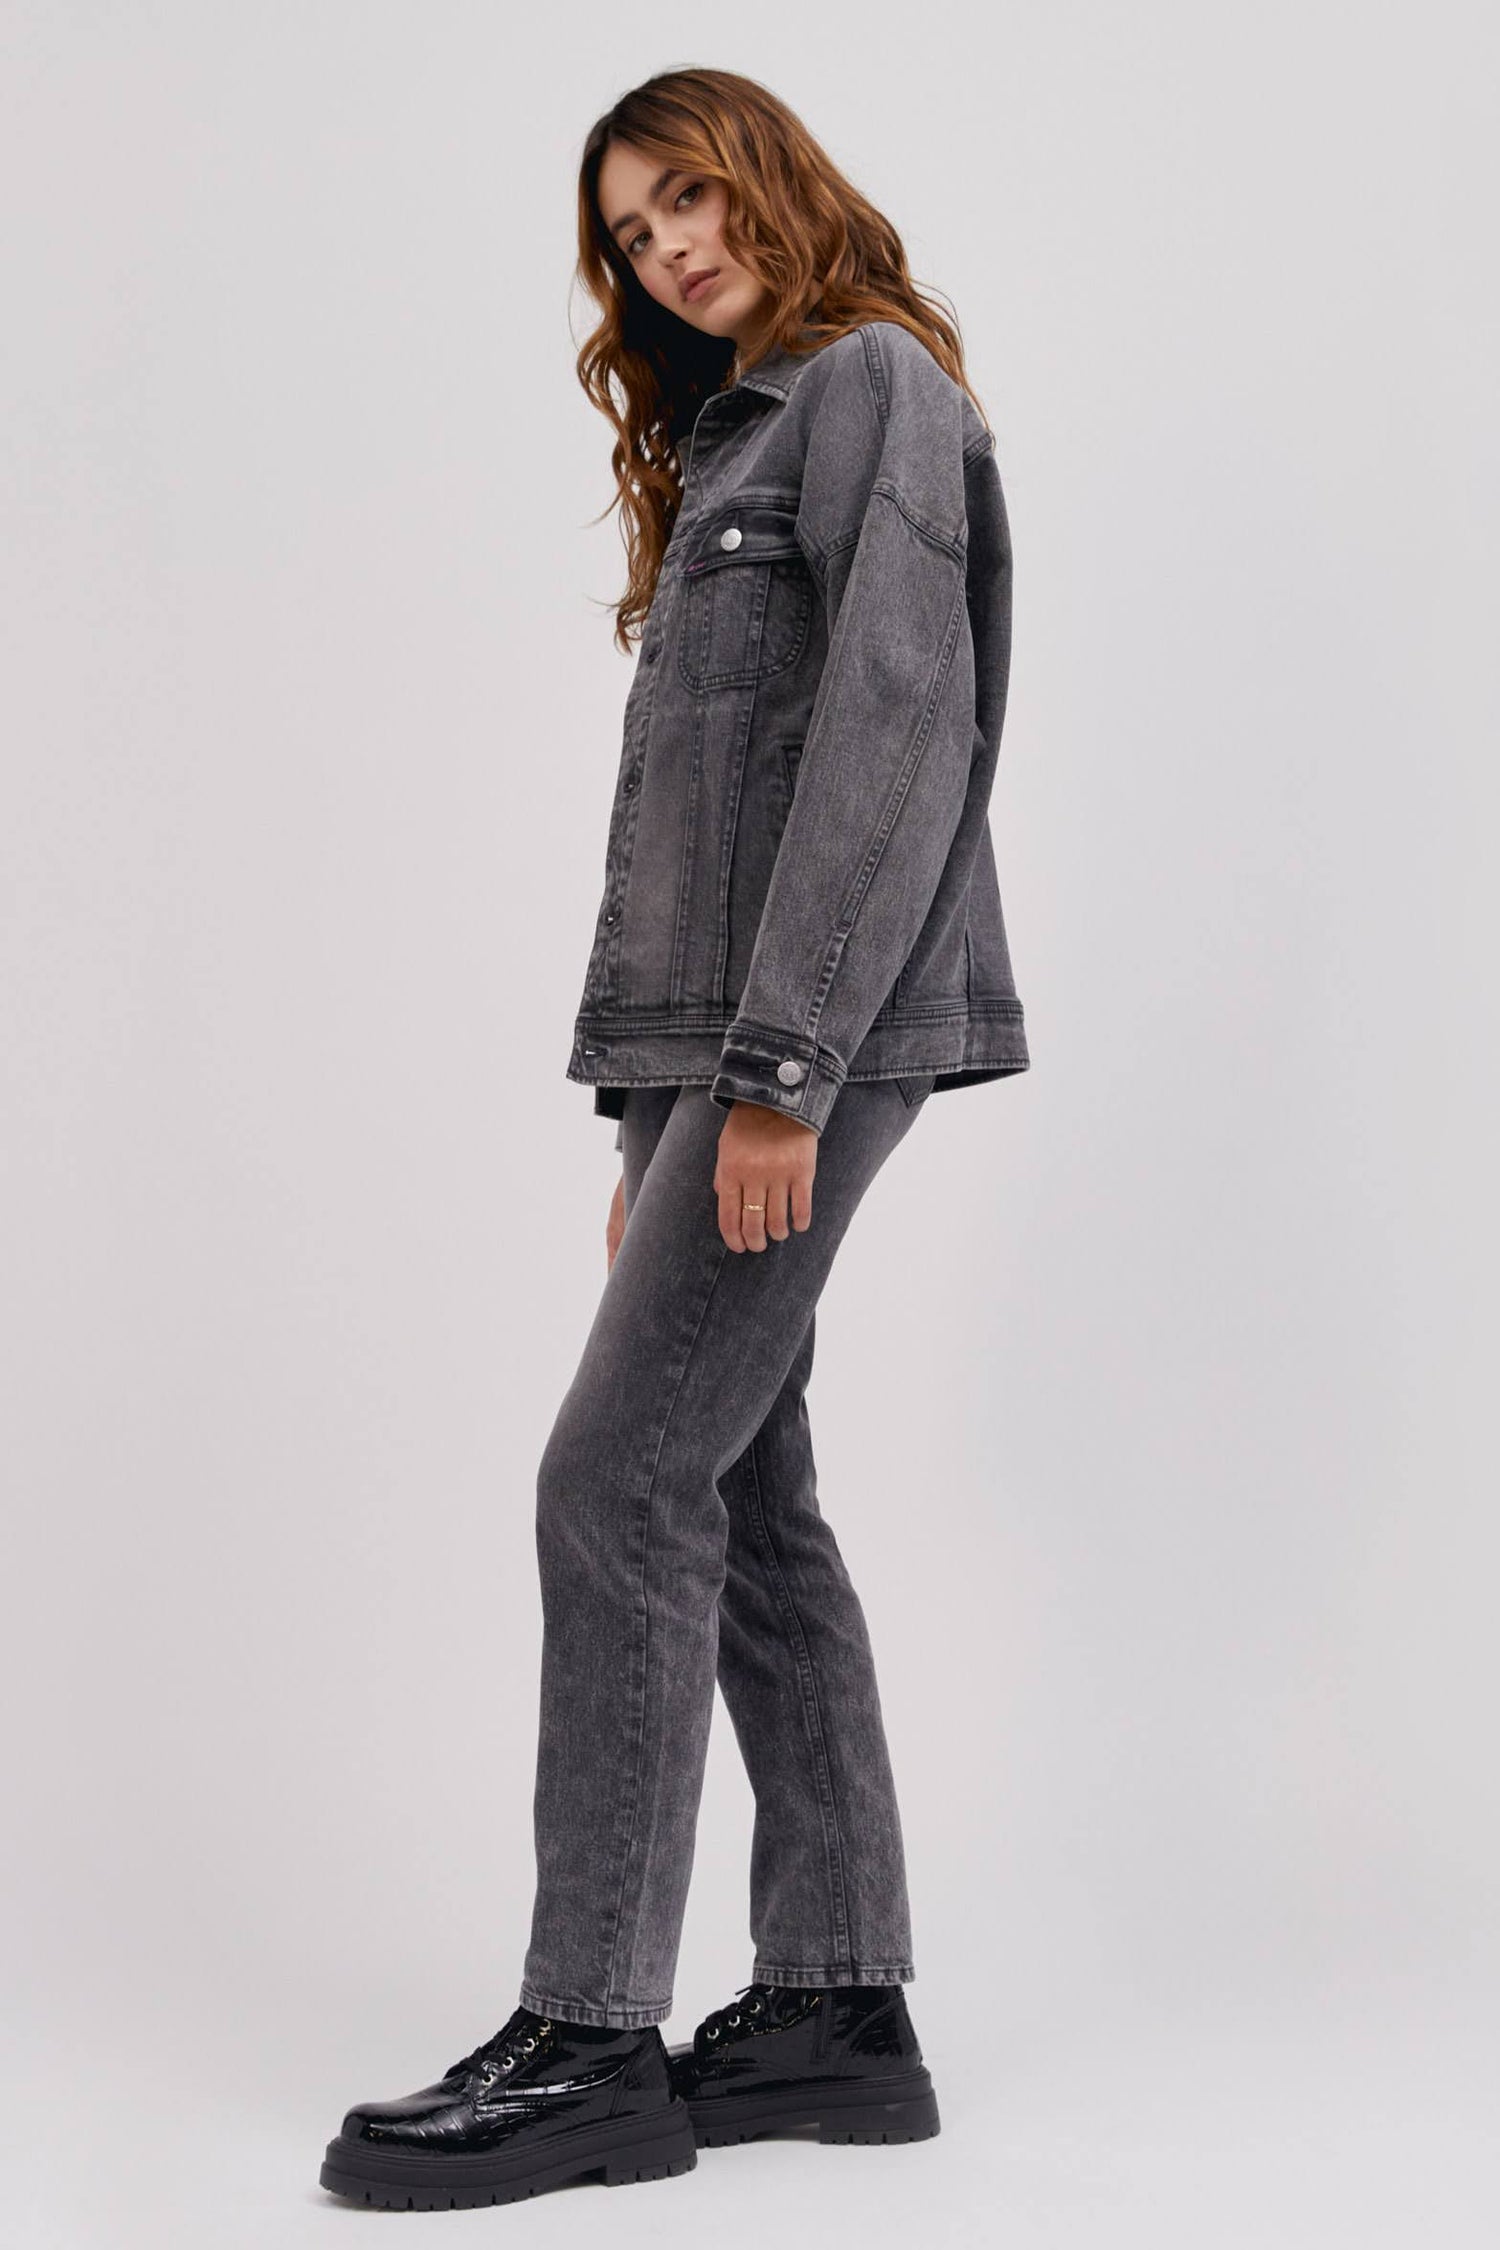 A curly-haired model featuring a sharp turn colored Loose Rider Jacket with a set of vertical pleats to the iconic zig-zag stitching and designed with an oversized look.